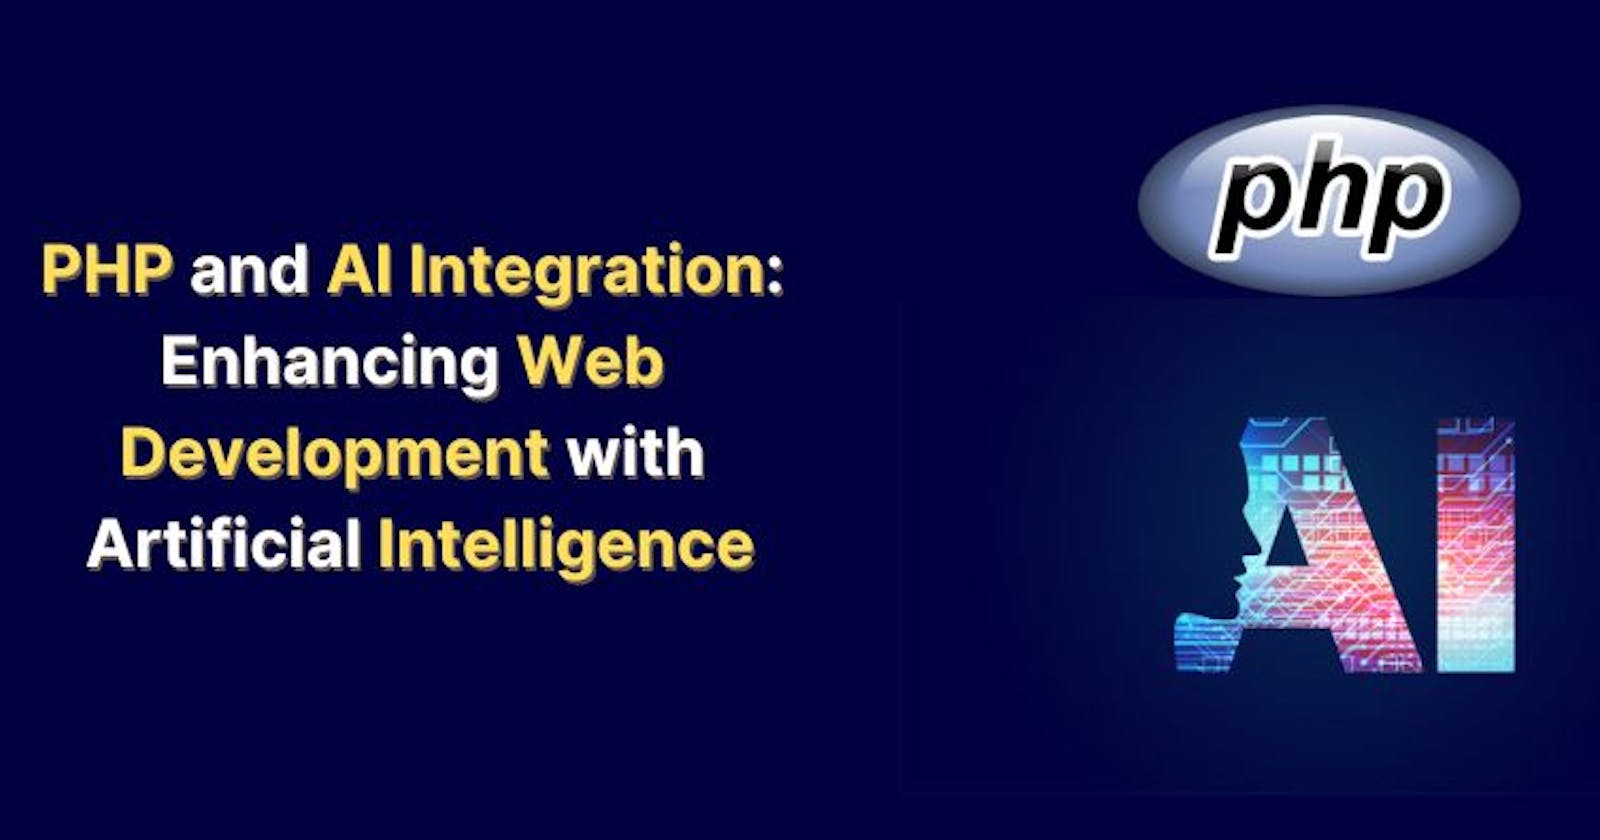 PHP and AI Integration: Enhancing Web Development with Artificial Intelligence